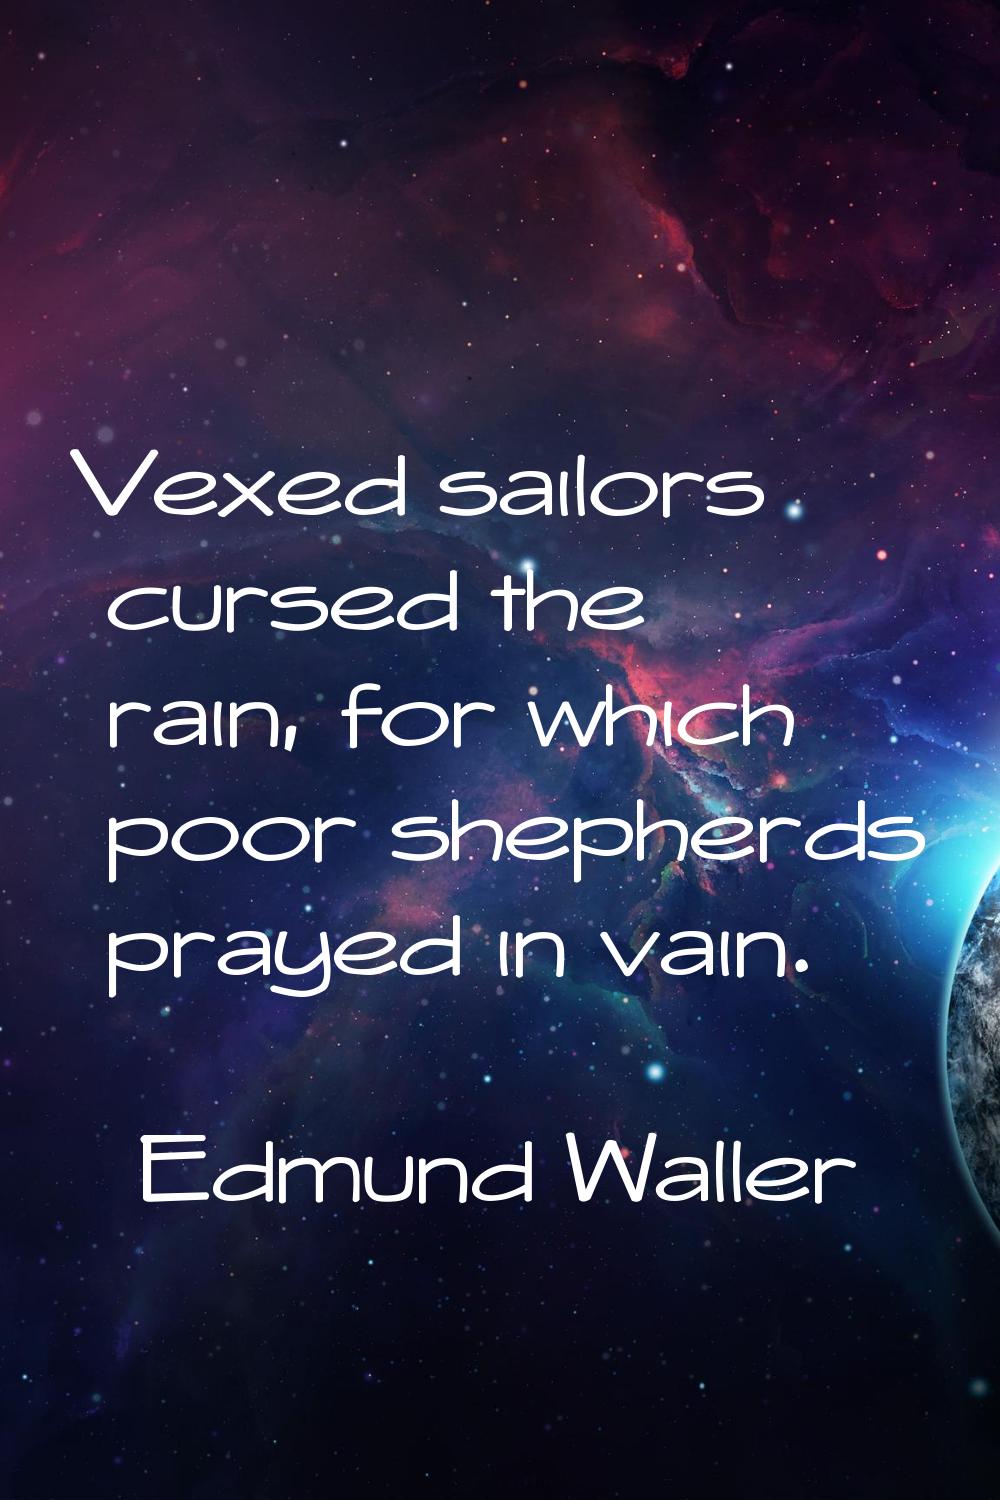 Vexed sailors cursed the rain, for which poor shepherds prayed in vain.